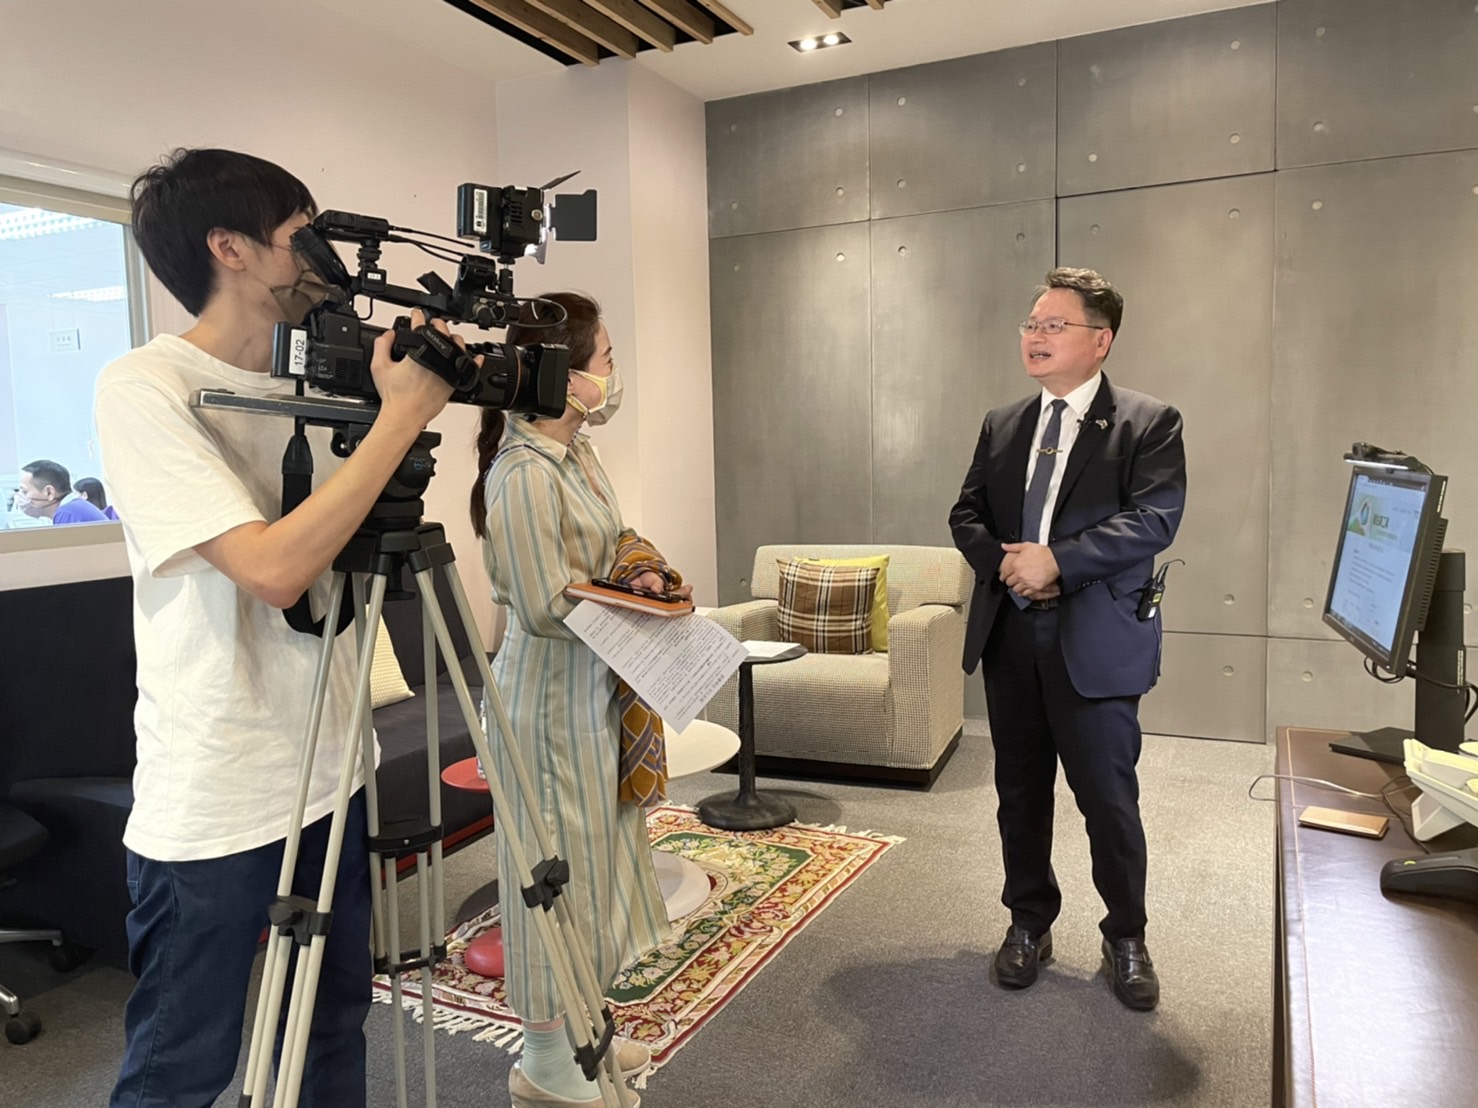 Gary Chen, president of MARTAS, accepted an USTV interview : SMEs have 3 deficiencies in carbon reduction